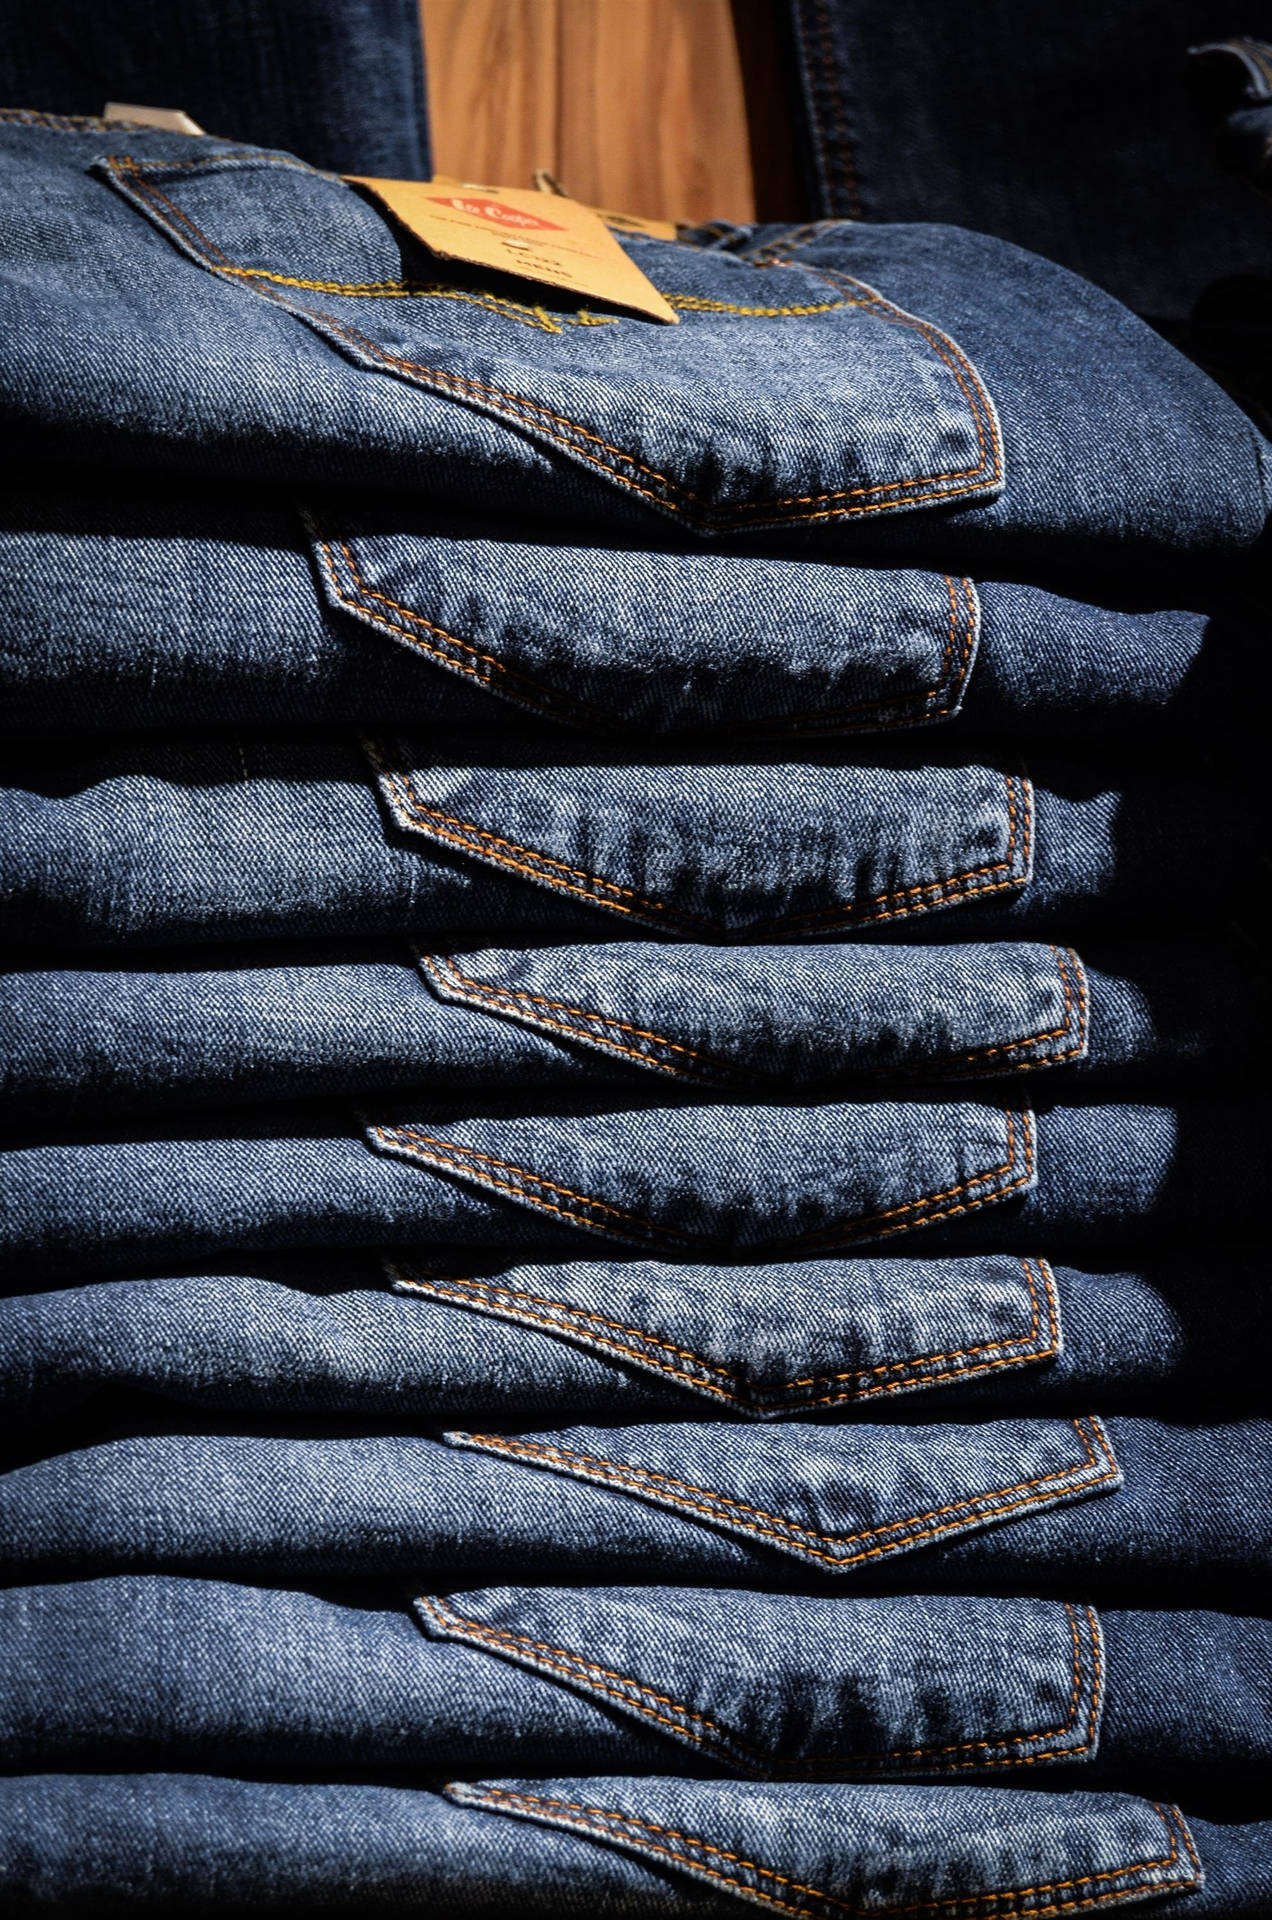 Stacked Uniformed Blue Jeans Background